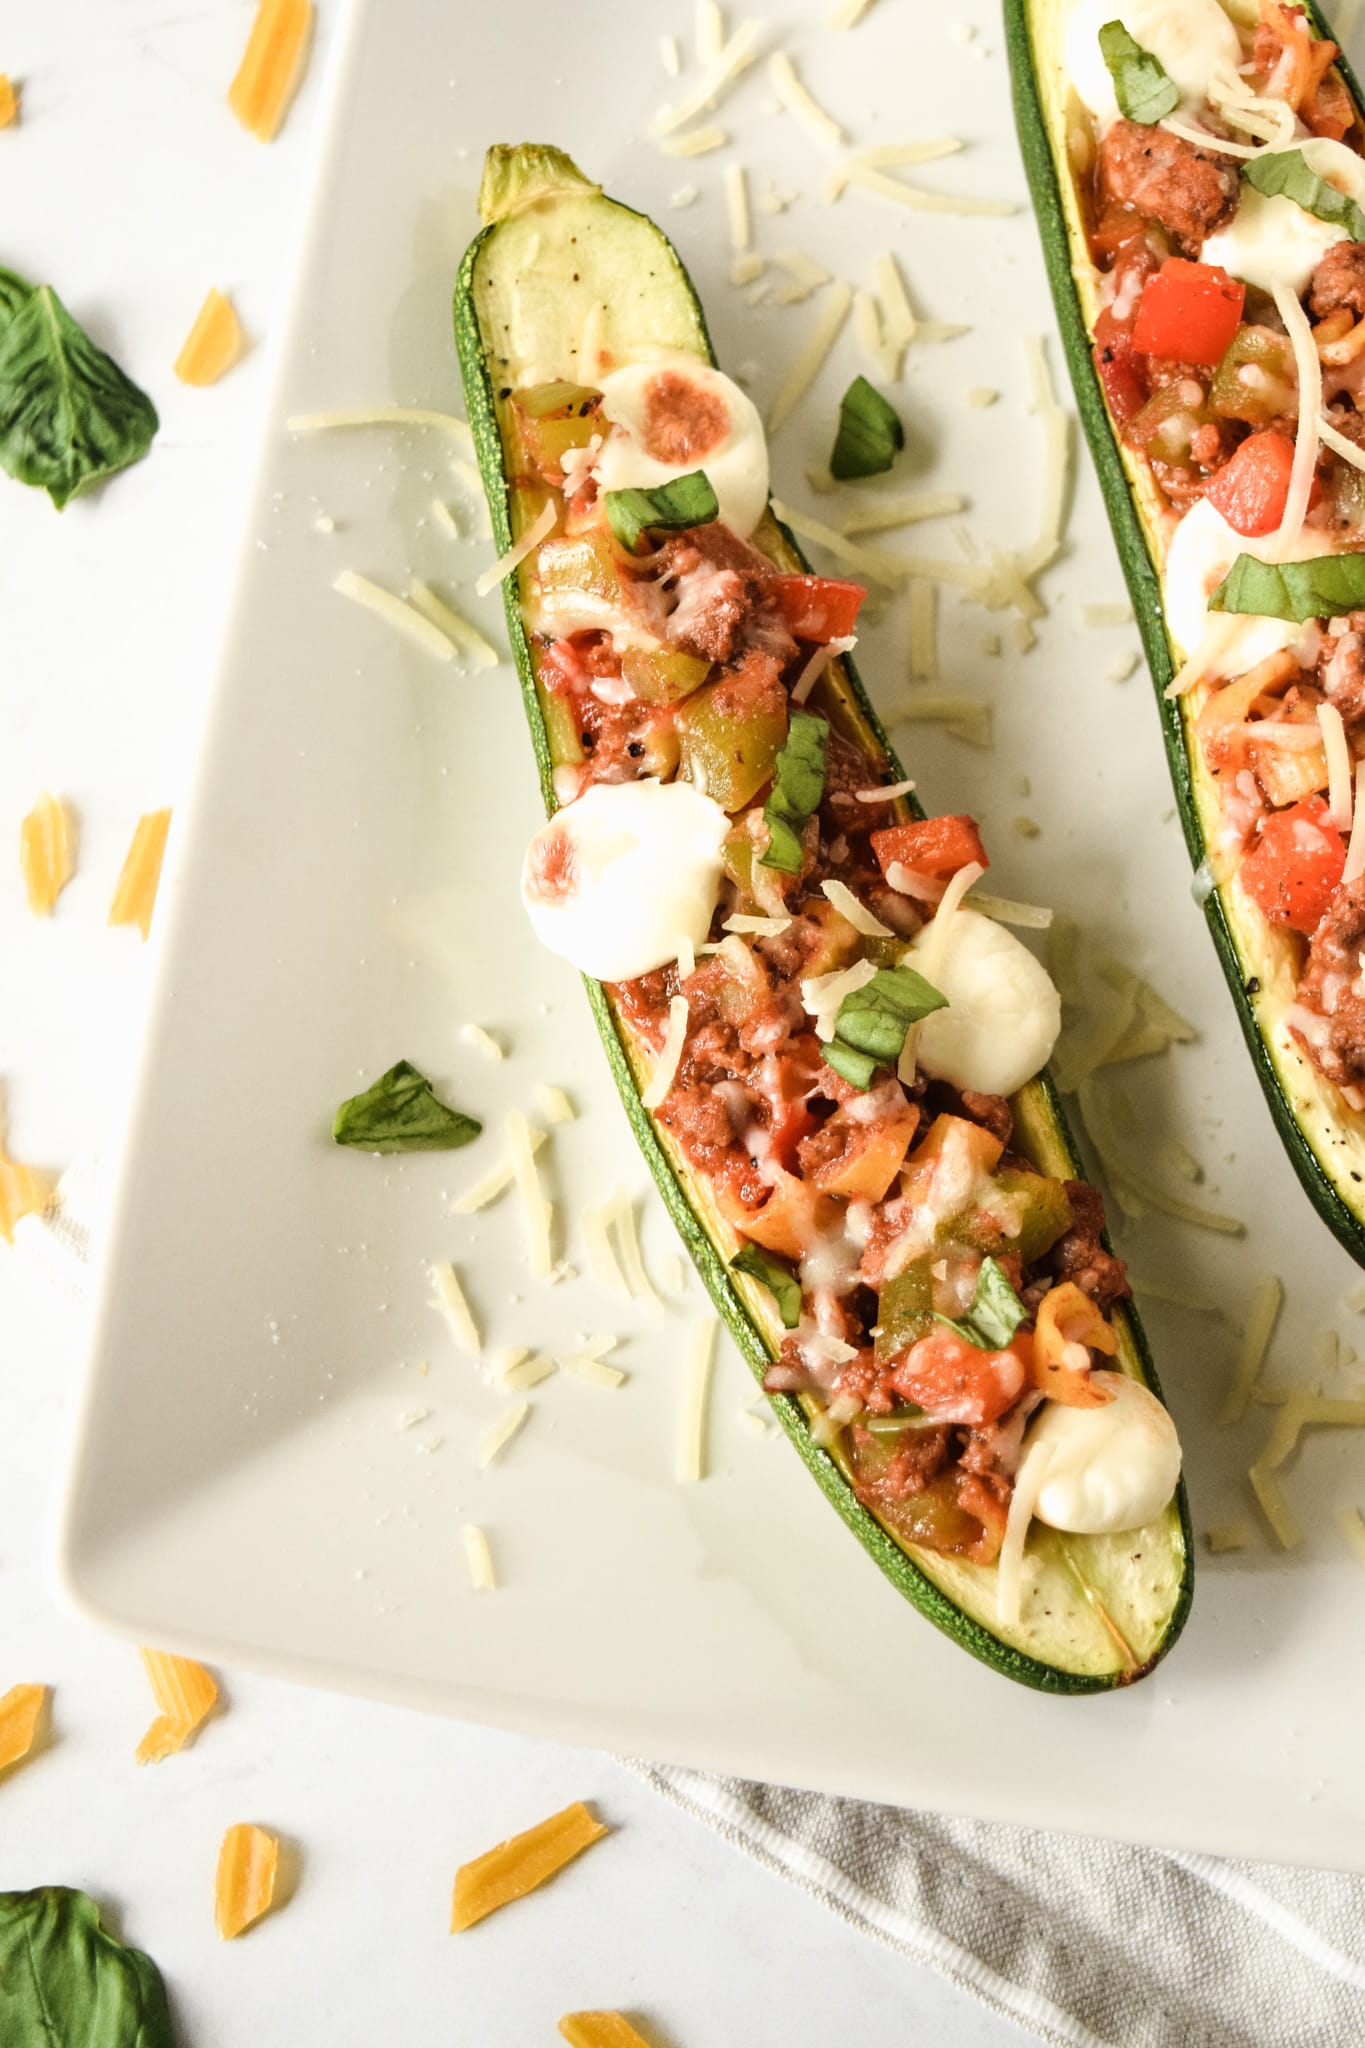 Italian Zucchini Boats with Broken Lasagna Noodles and Beef